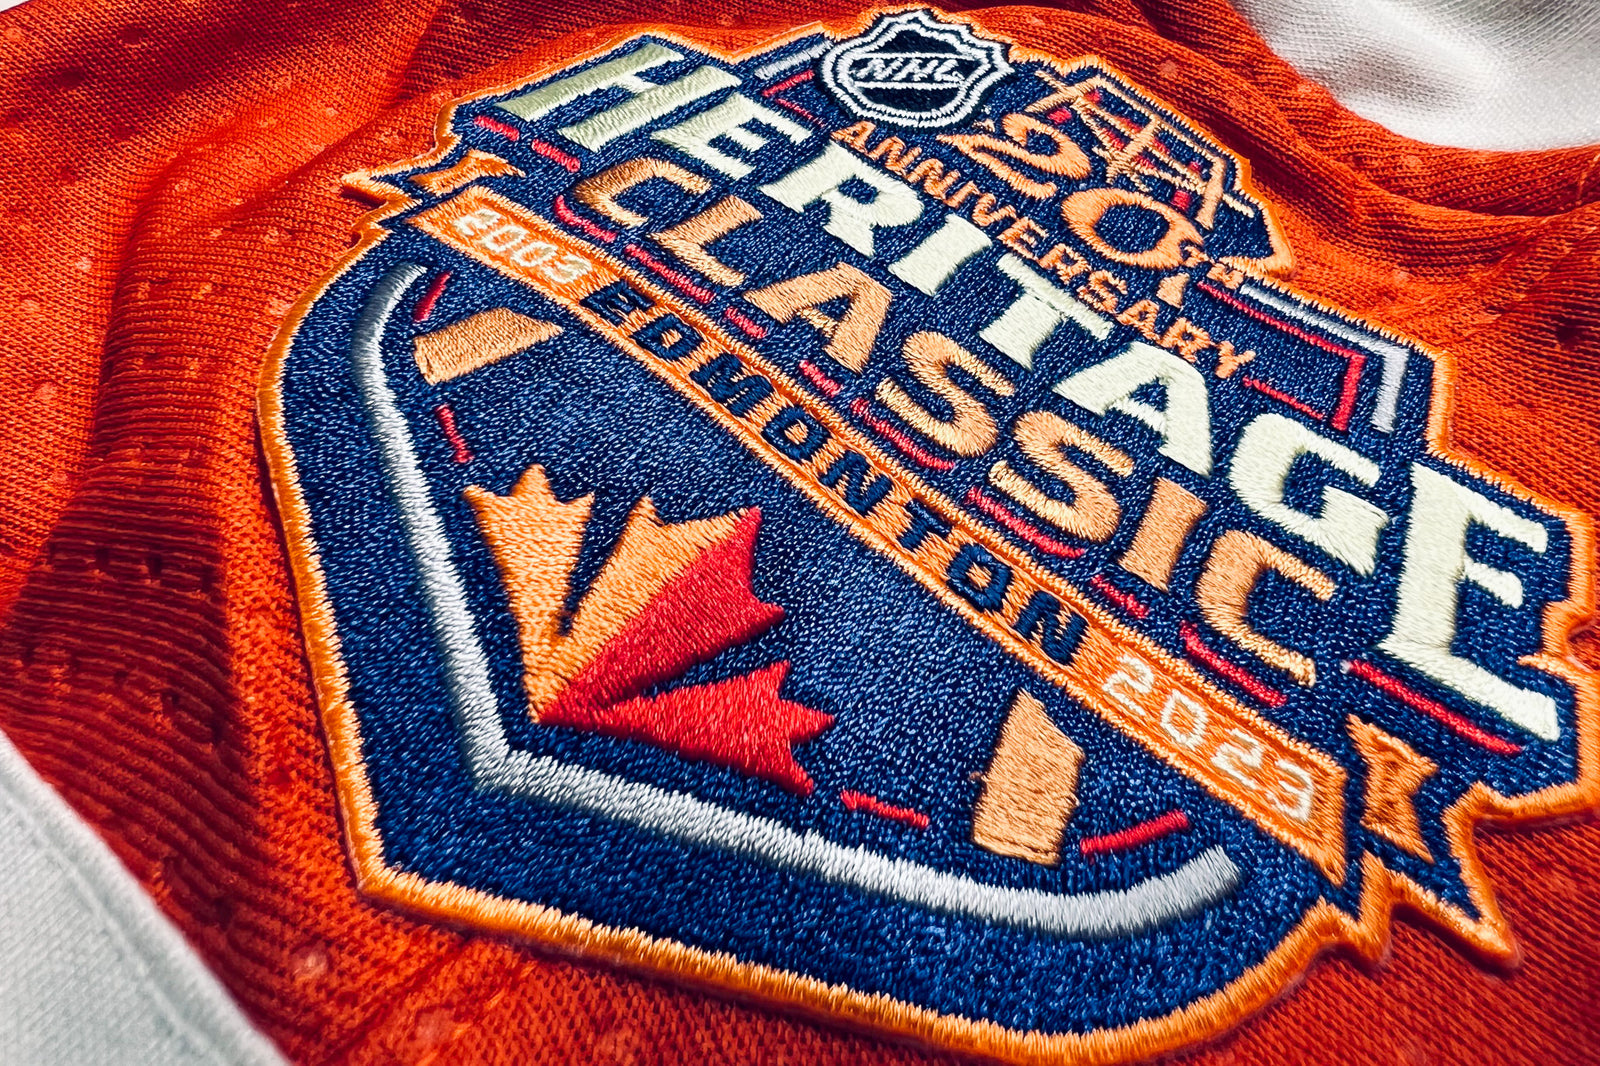 ANY NAME AND NUMBER EDMONTON OILERS 2023 HERITAGE CLASSIC AUTHENTIC AD –  Hockey Authentic